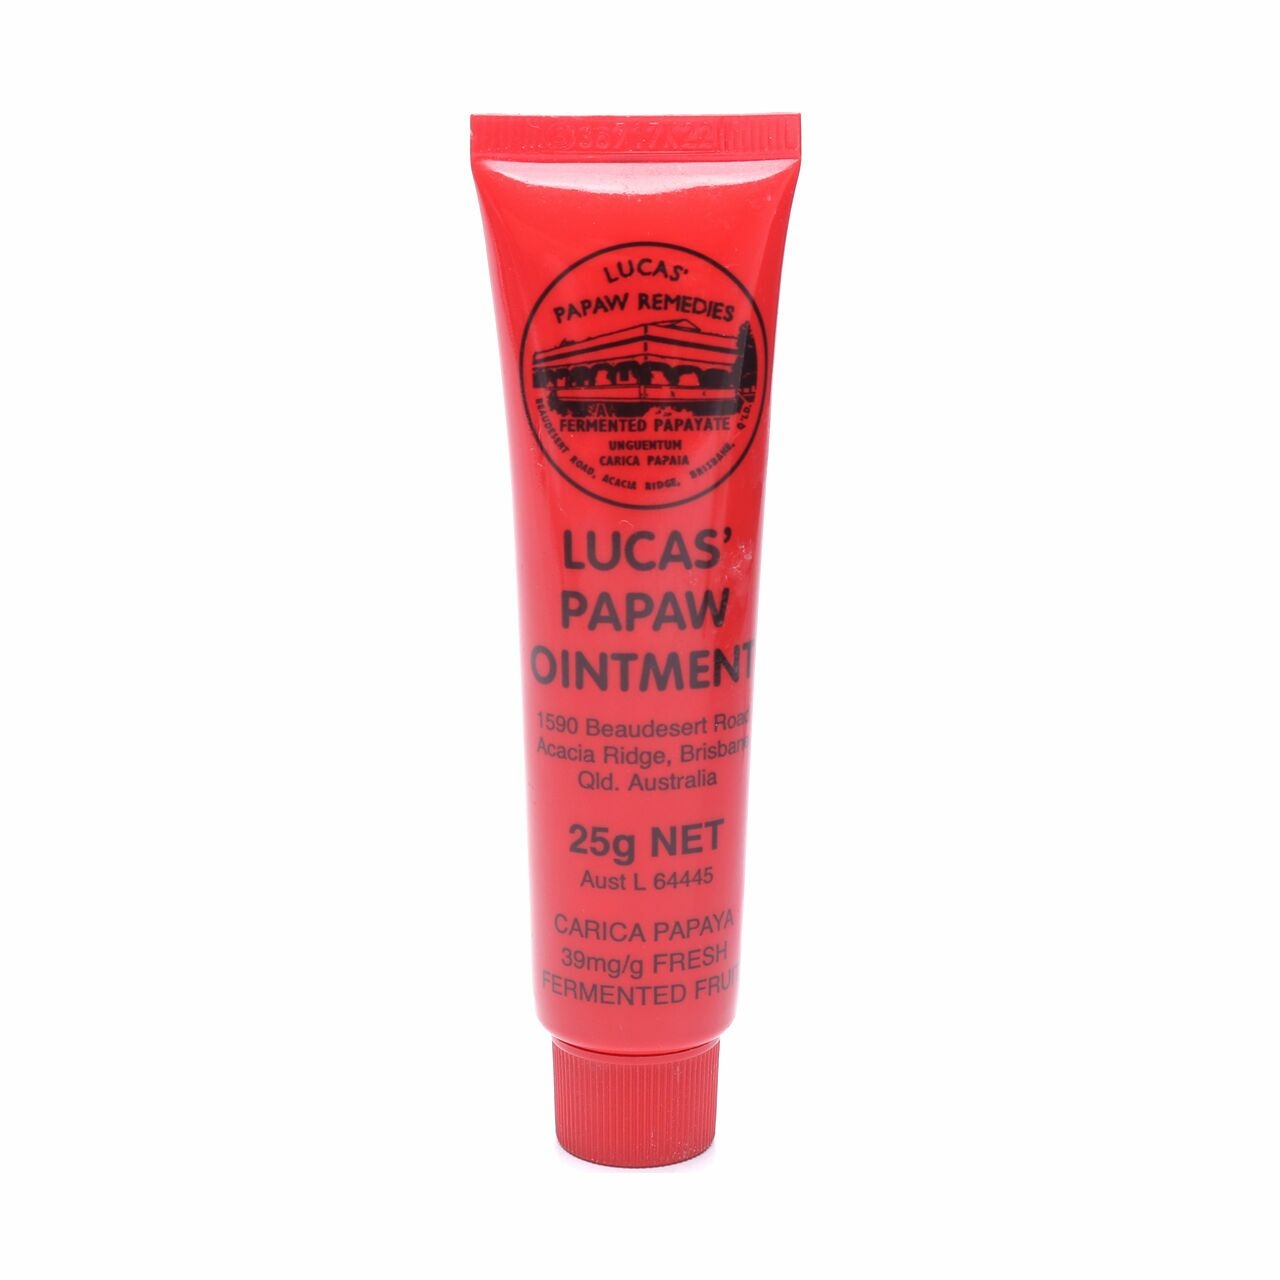 Lucas Papaw Ointment Skin Care